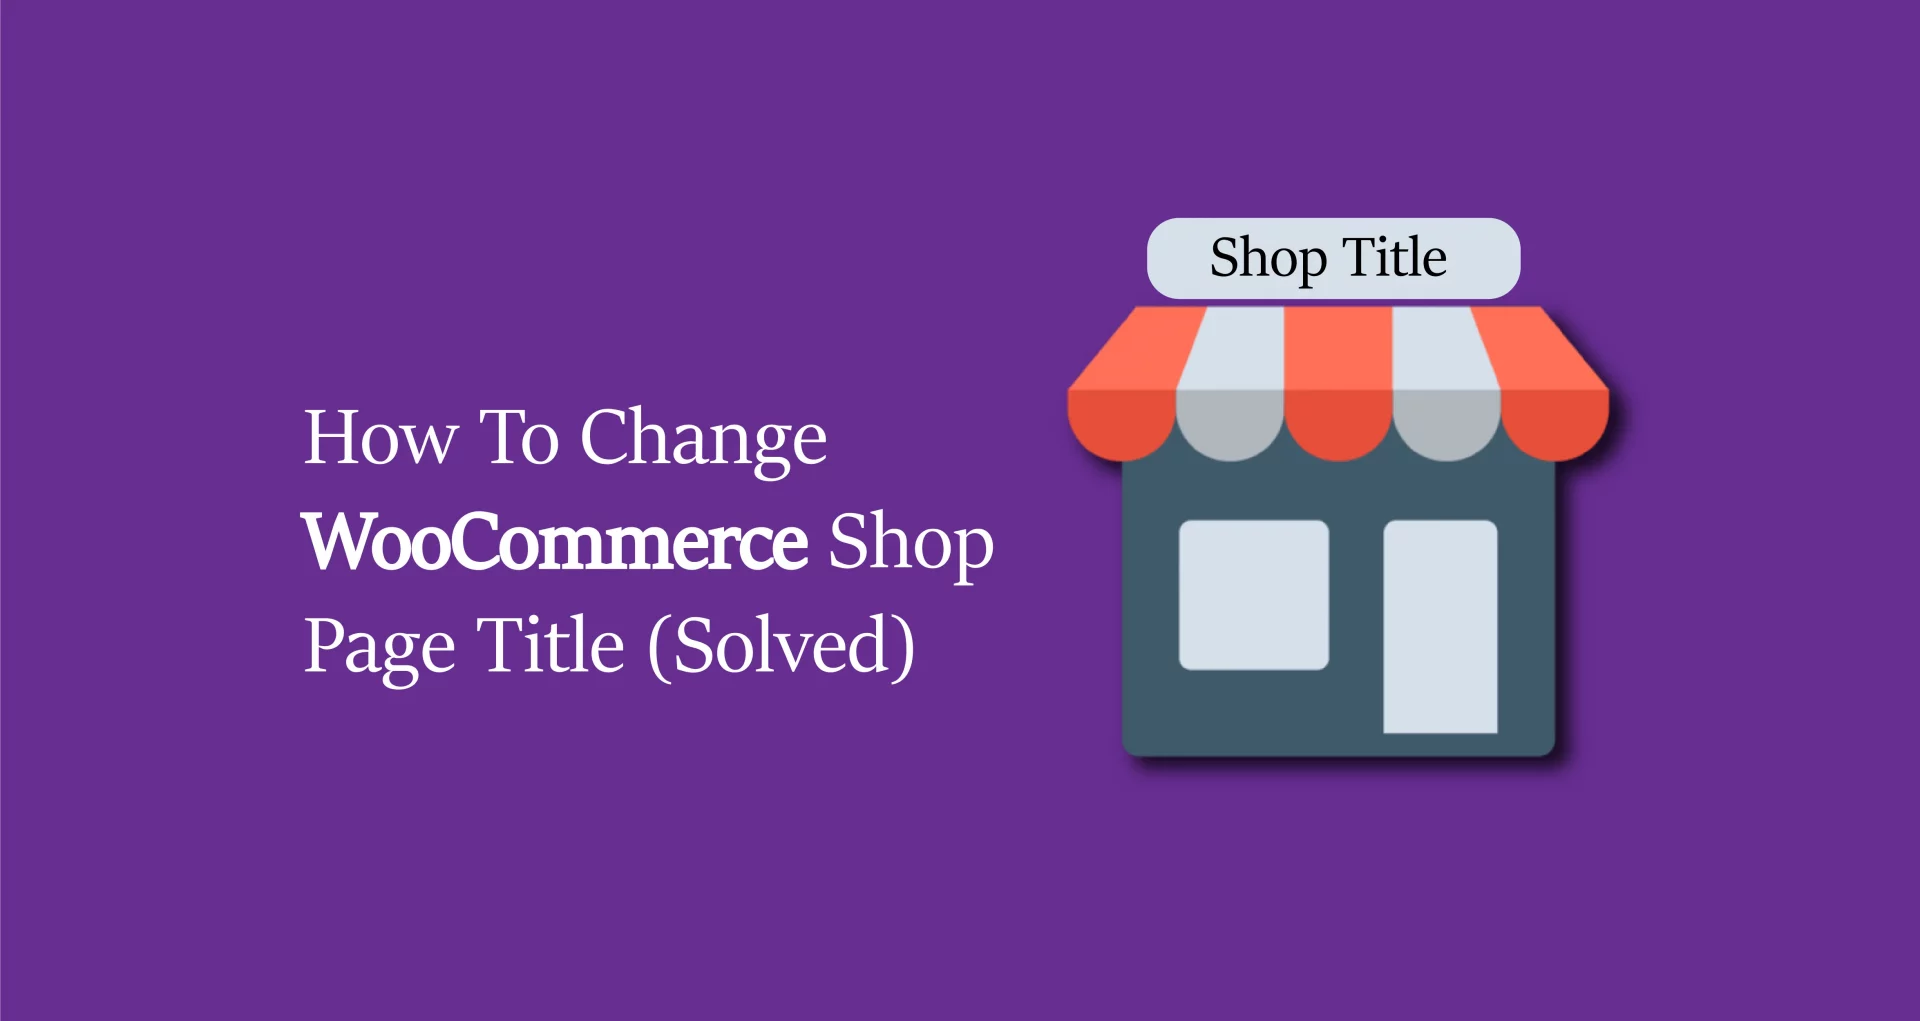 How To Change WooCommerce Shop Page Title (Solved)